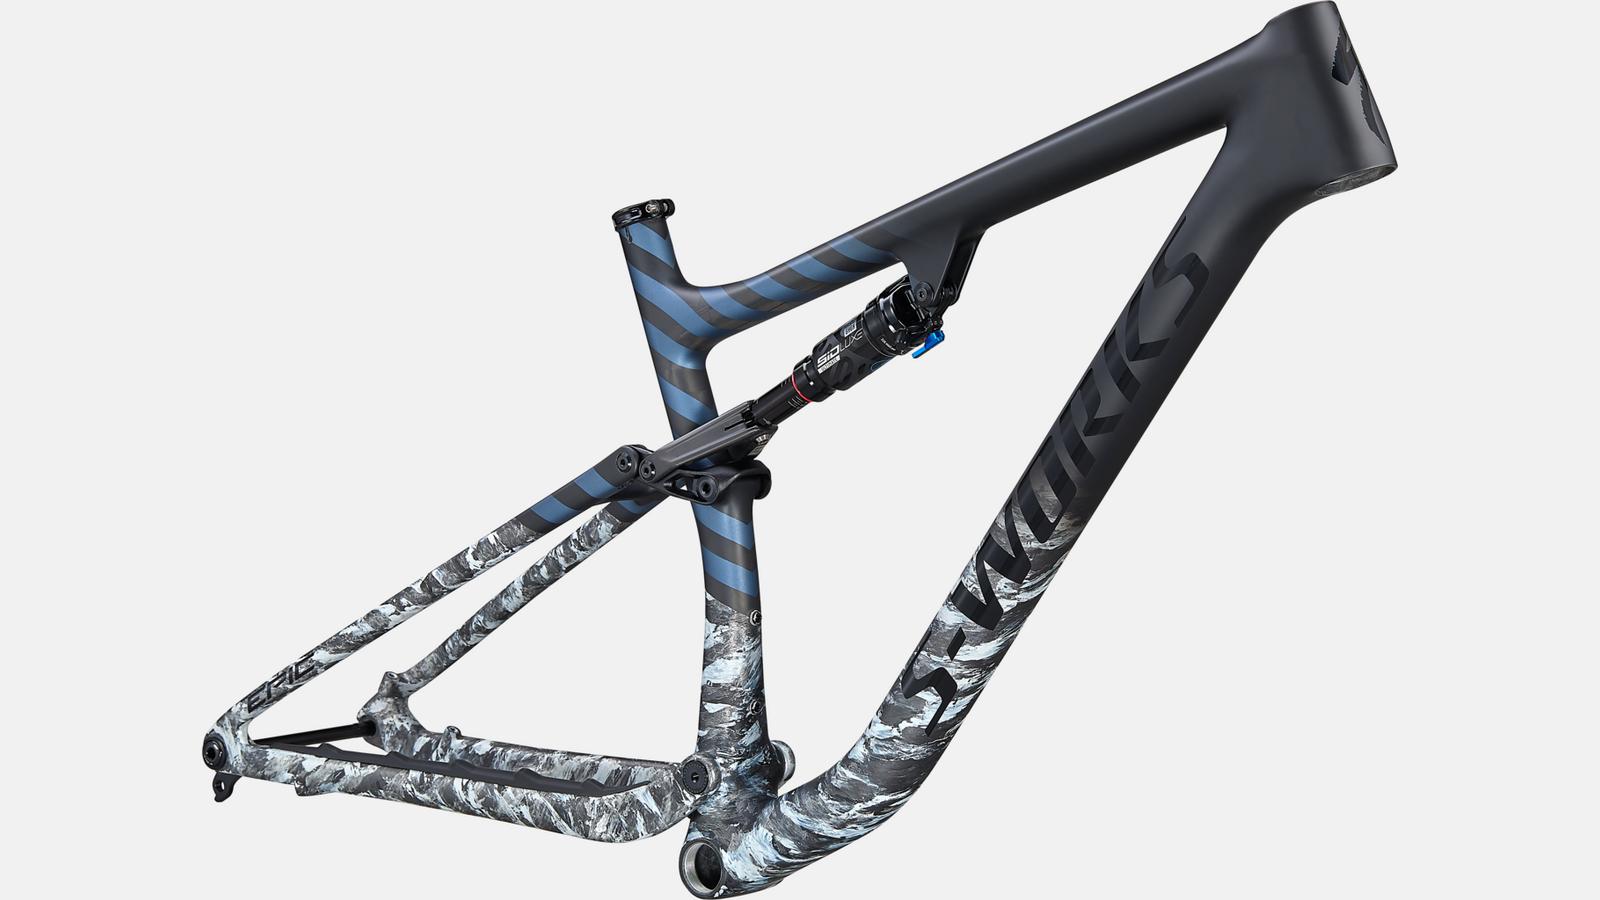 Paint for 2021 Specialized S-Works Epic EVO Frameset - Satin Flake Silver